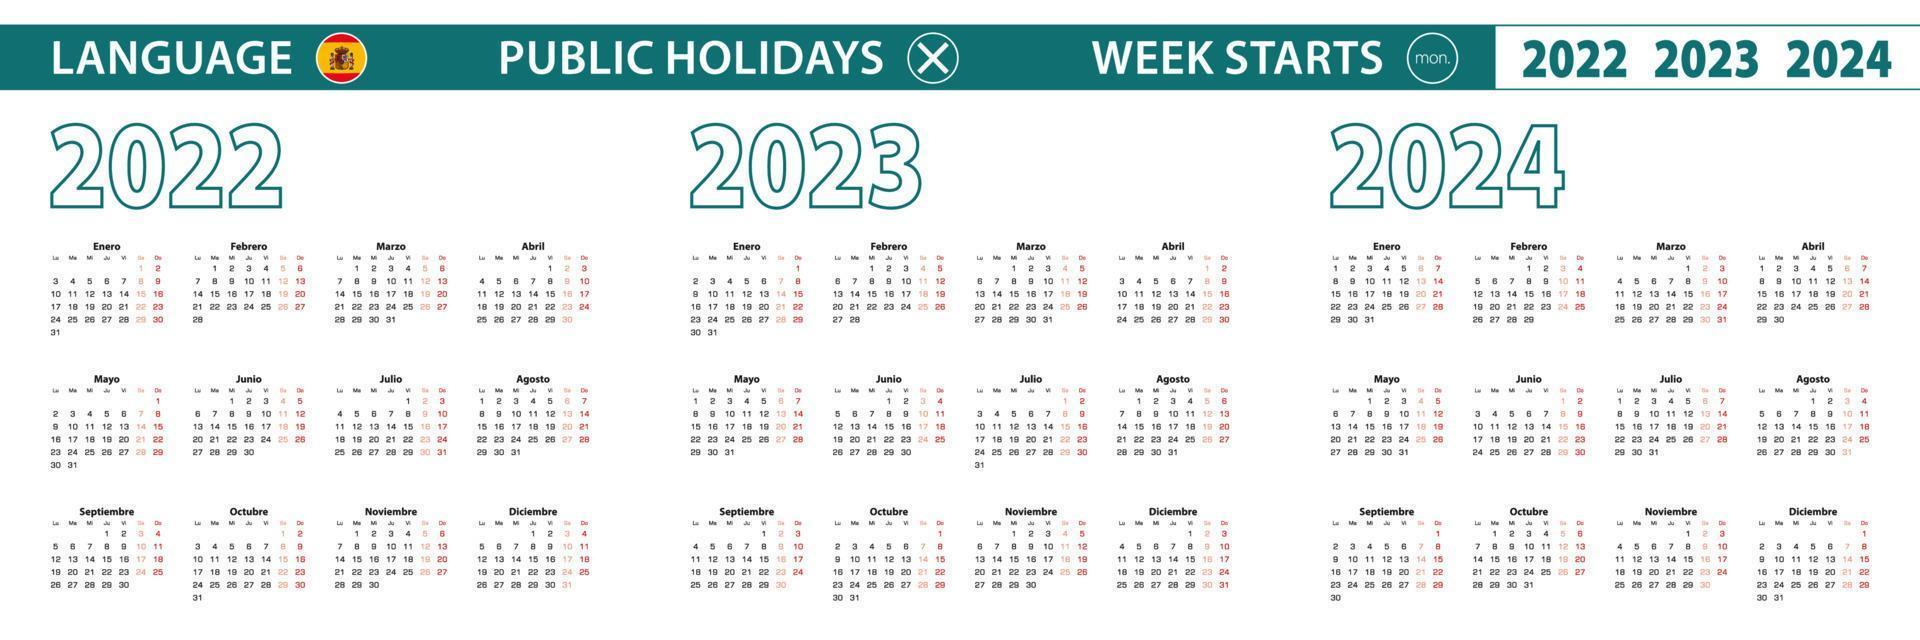 Simple calendar template in Spanish for 2022, 2023, 2024 years. Week starts from Monday. vector